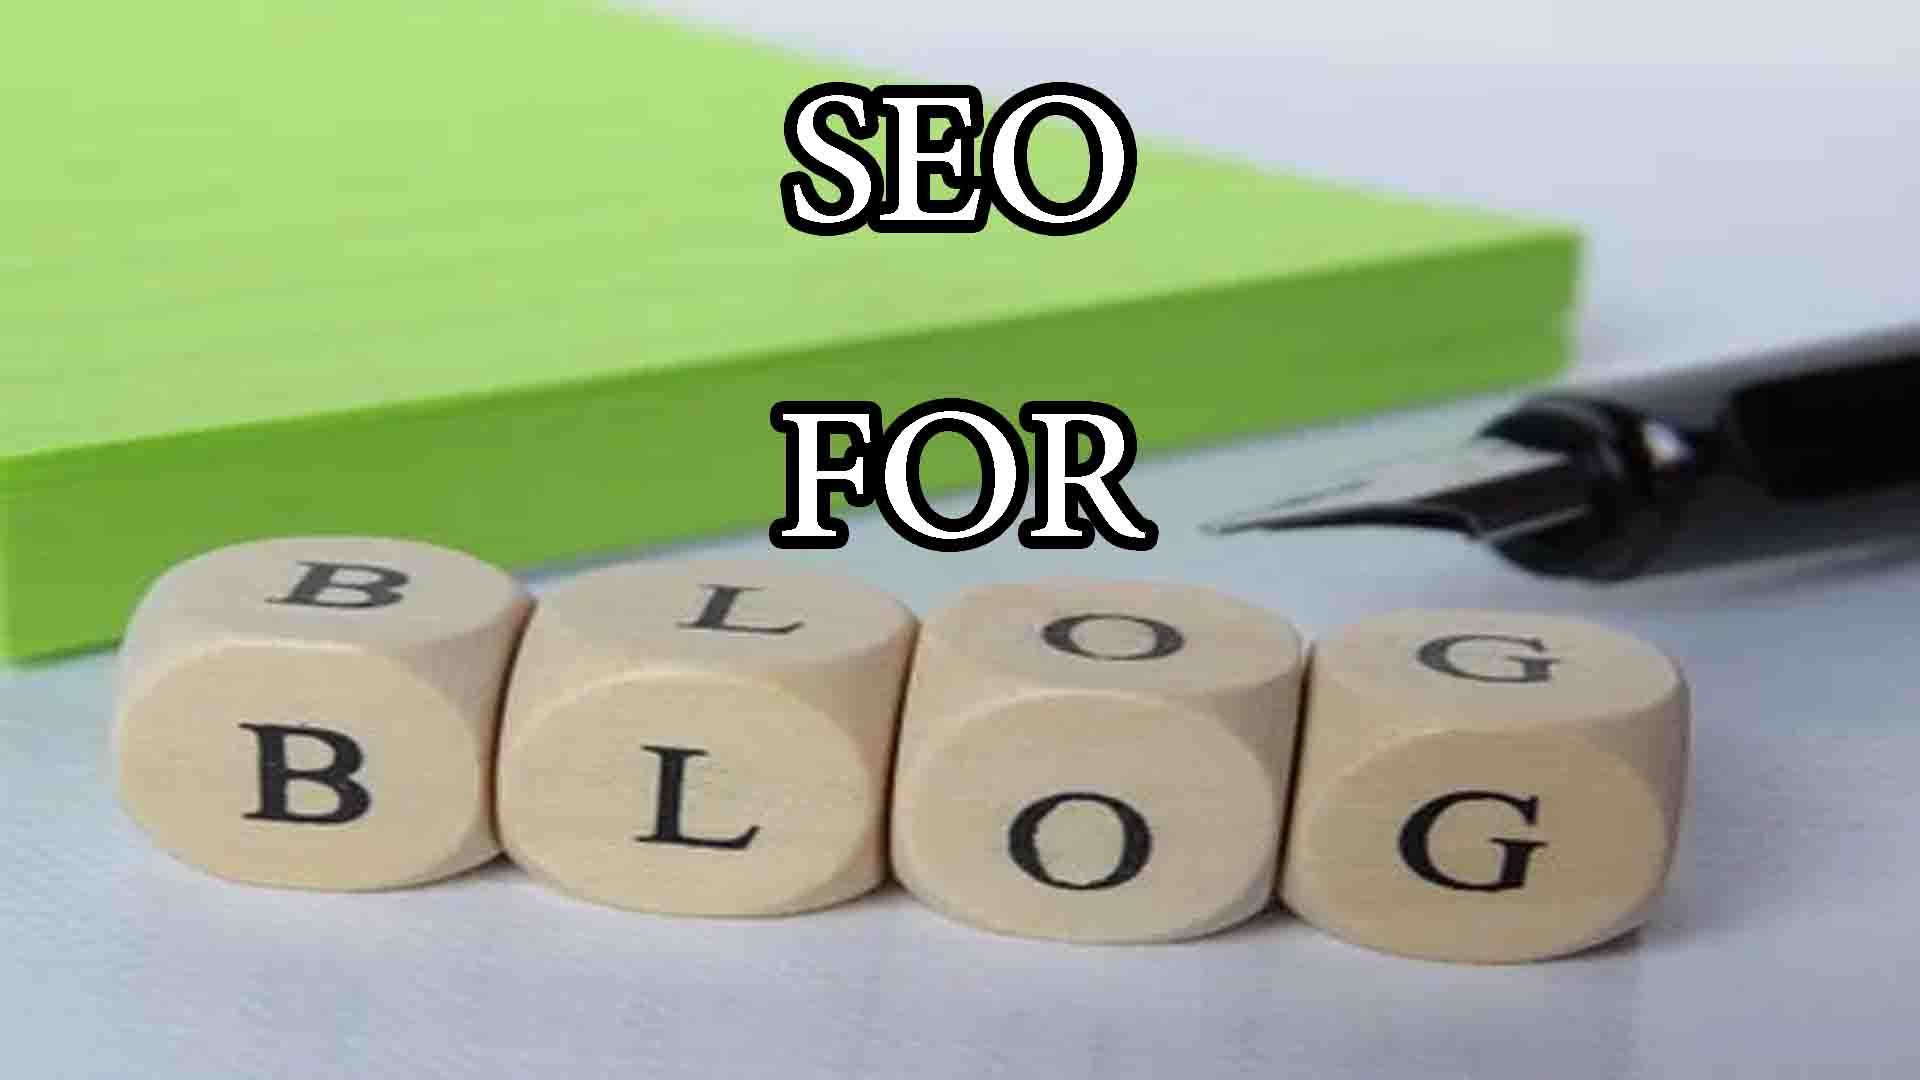 SEO FOR BLOGGERS